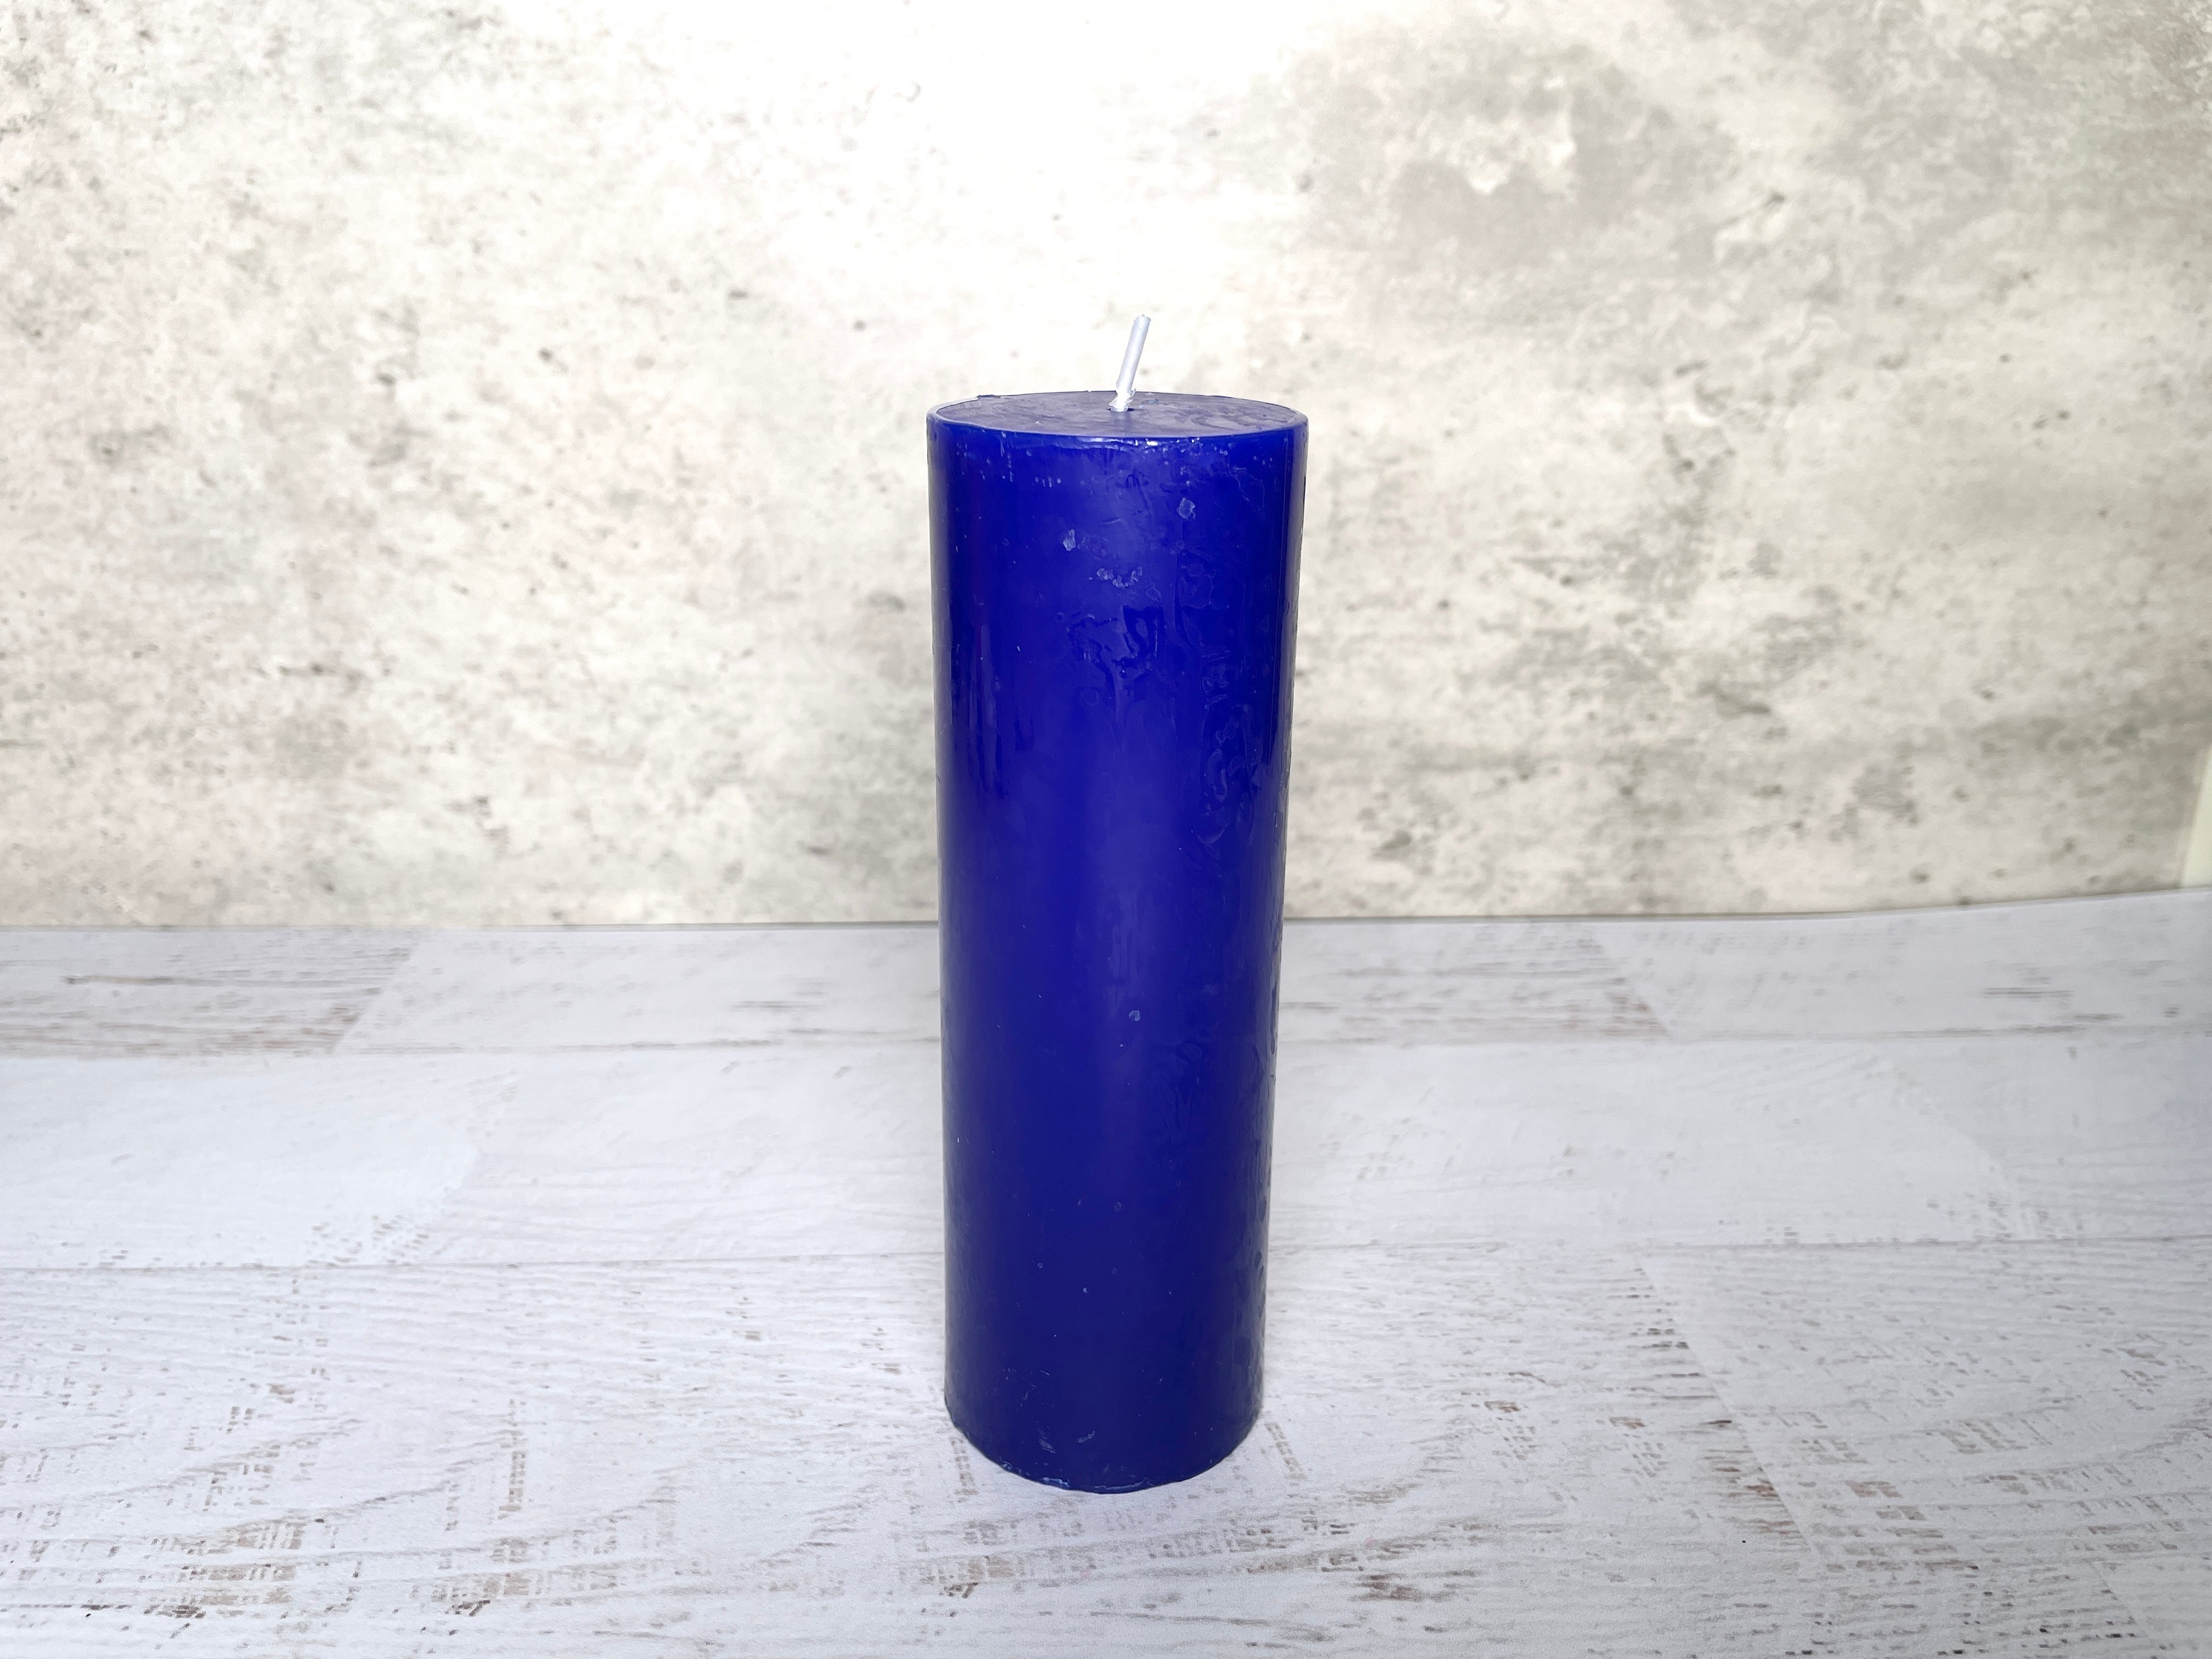 Buy Online Latest and Unique Blue Pillar Candle 2" x 6" - Health, Harmony, Balance, Communication | Shop Best Spiritual Items - The Mystical Ritual